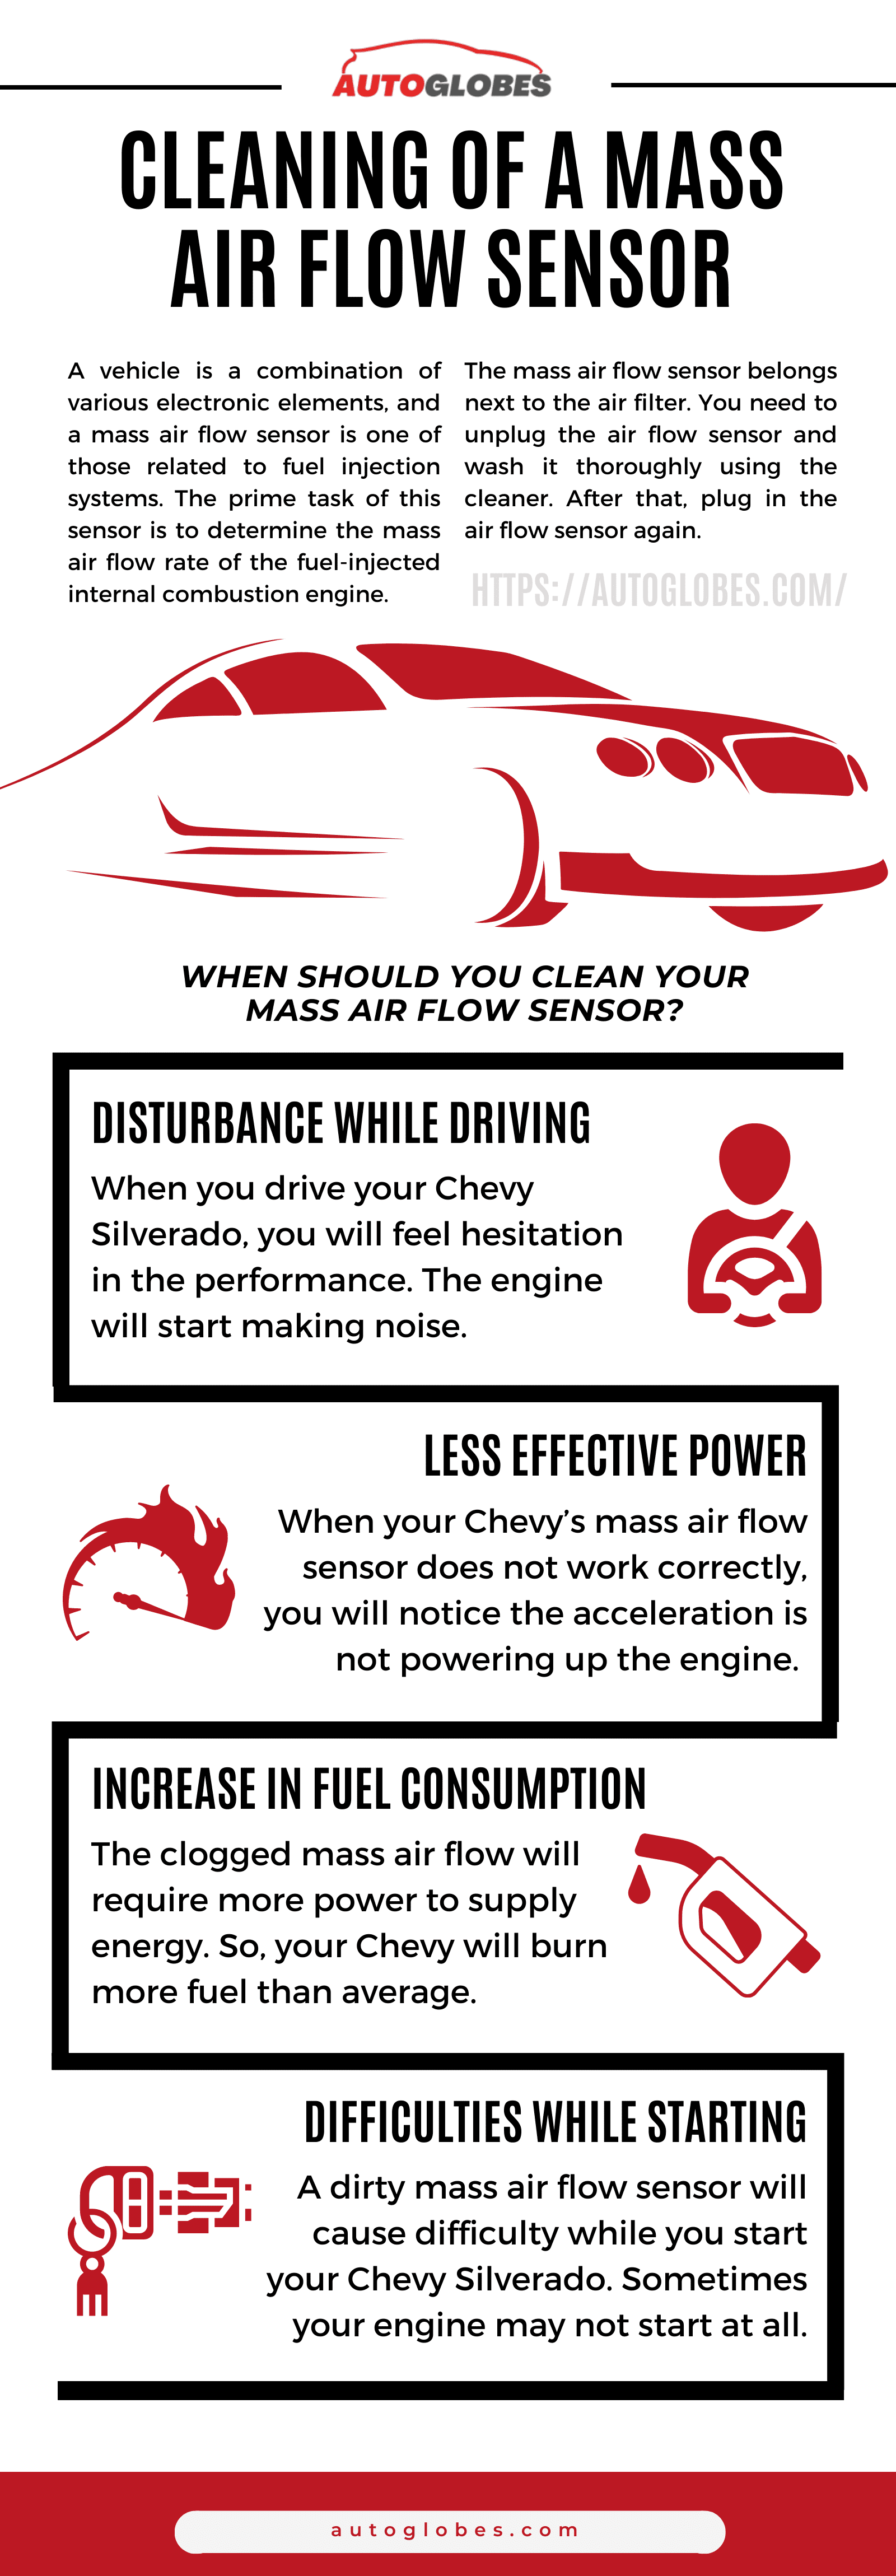 Cleaning of a mass air flow sensor Infographic